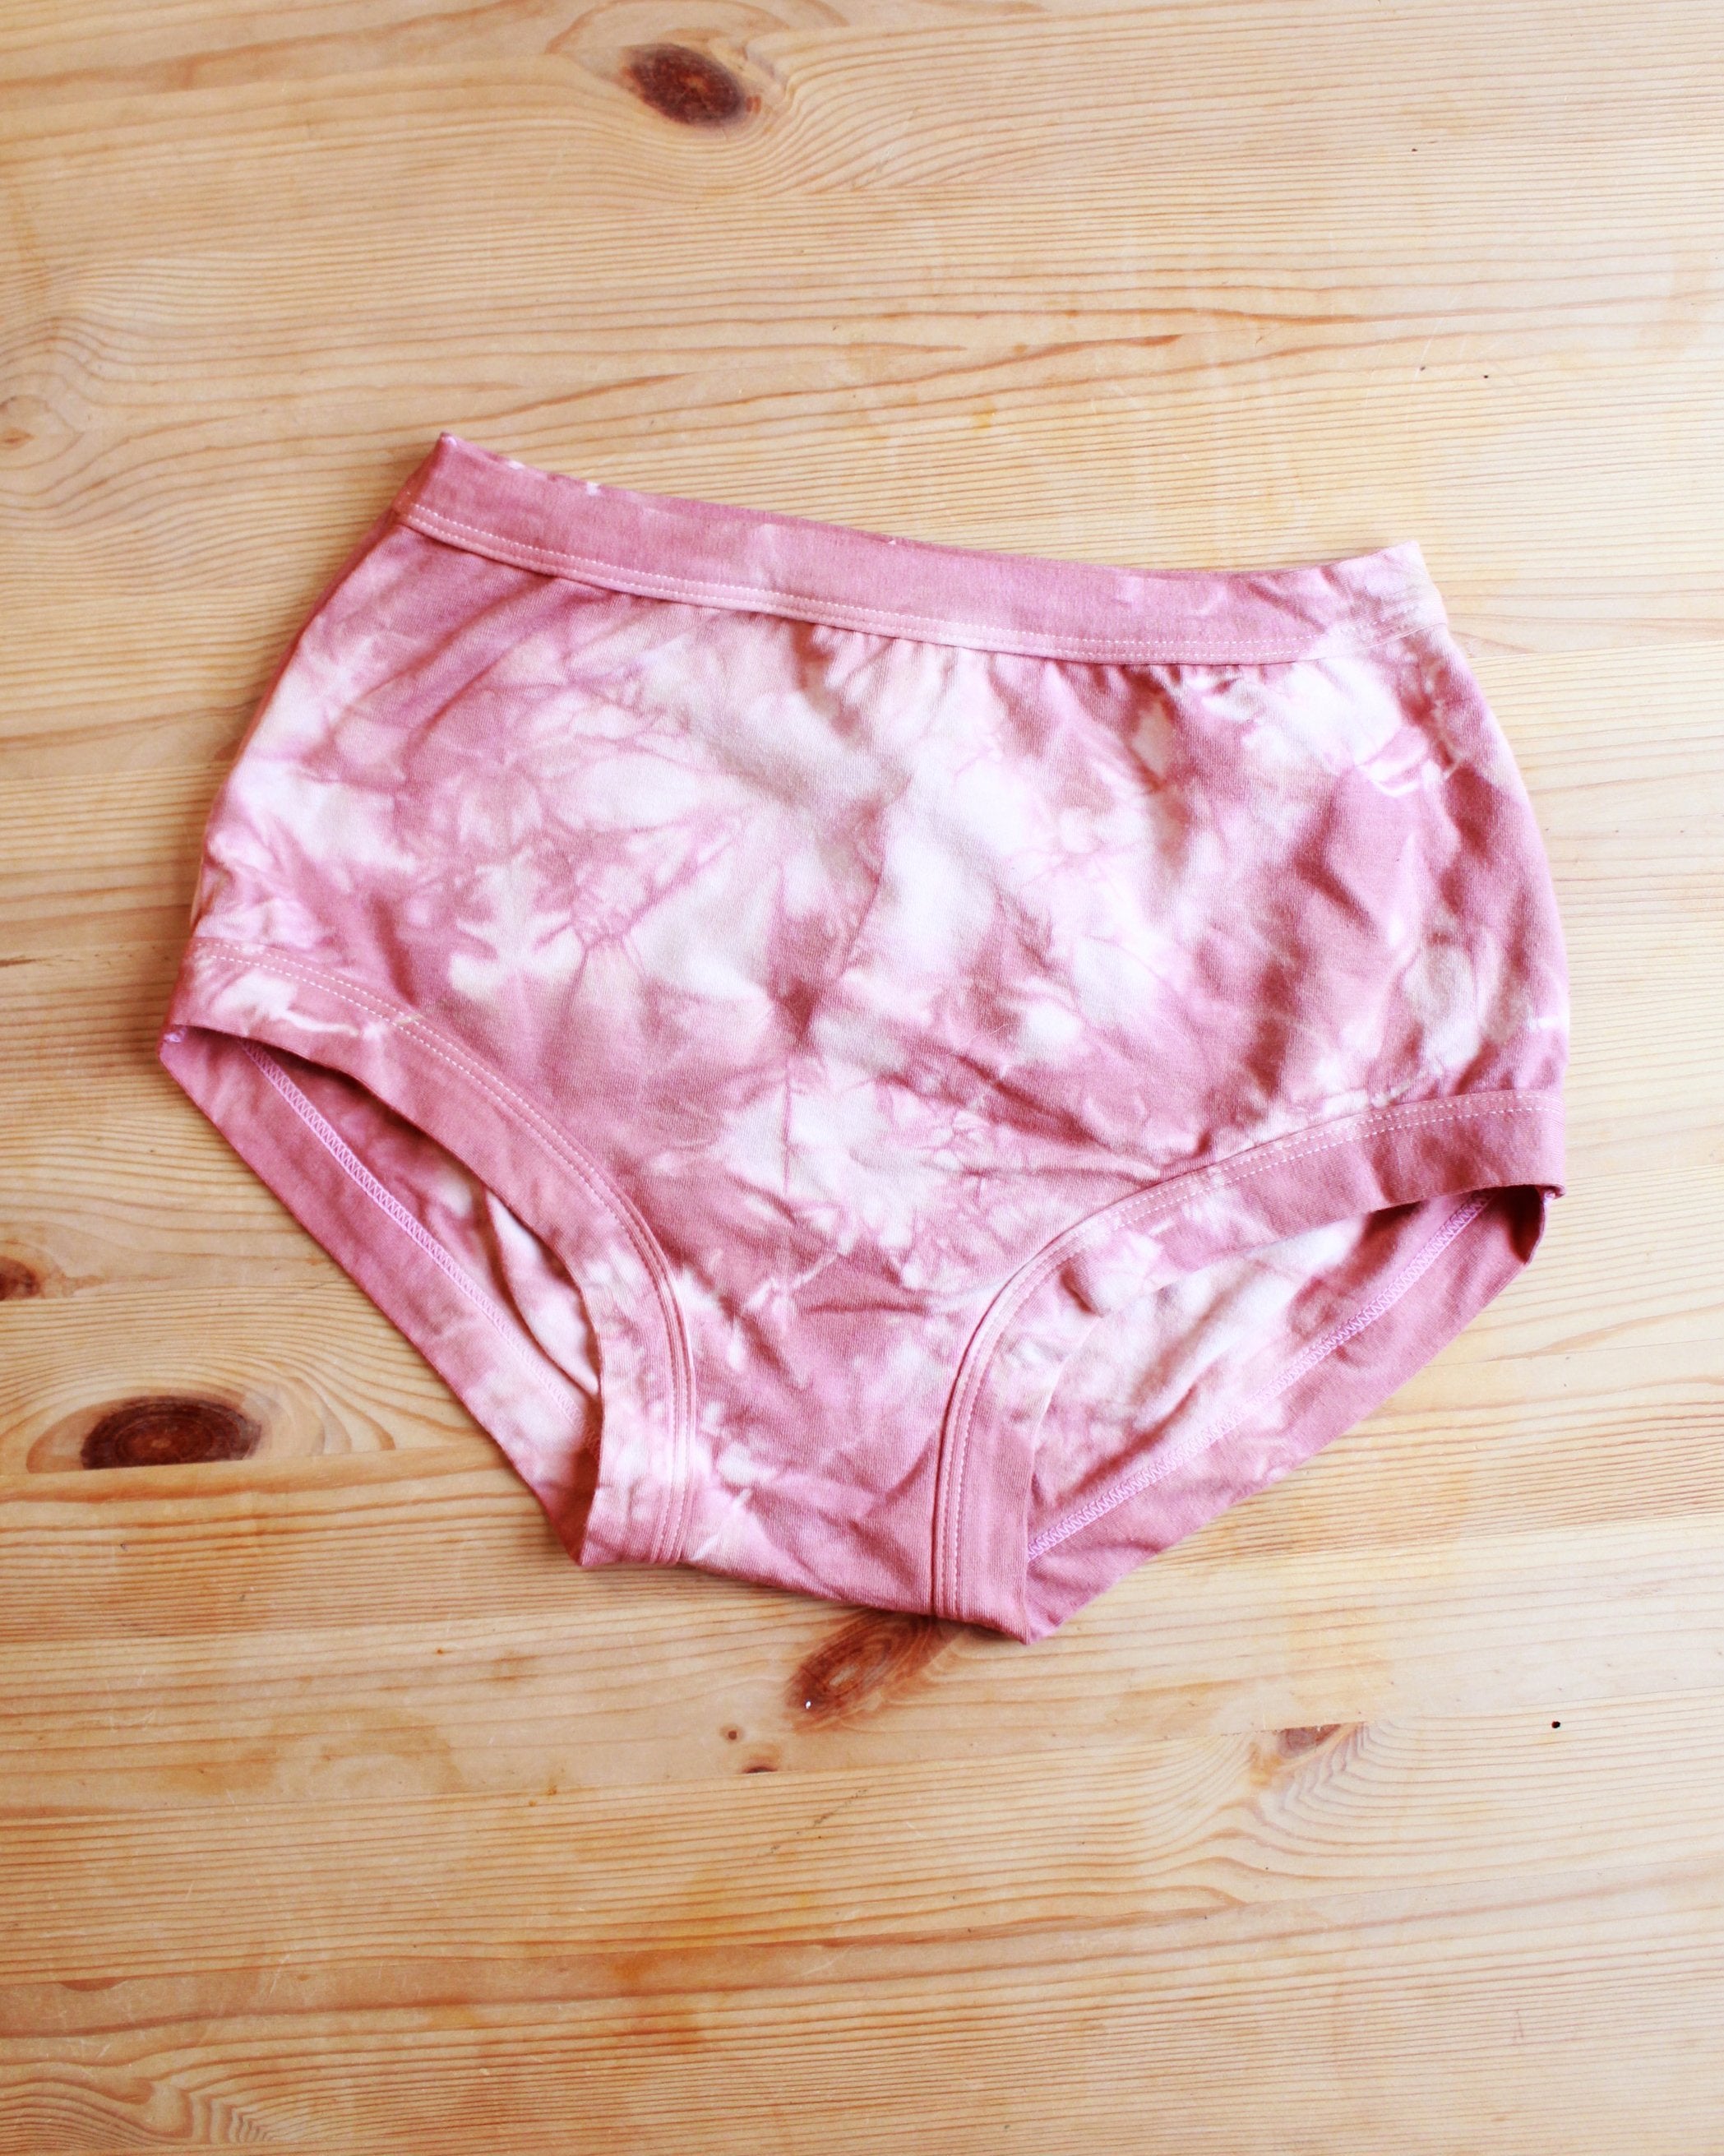 Front flat lay of Thunderpants organic cotton Women’s Original style underwear in limited edition hand dye pink tie dye.